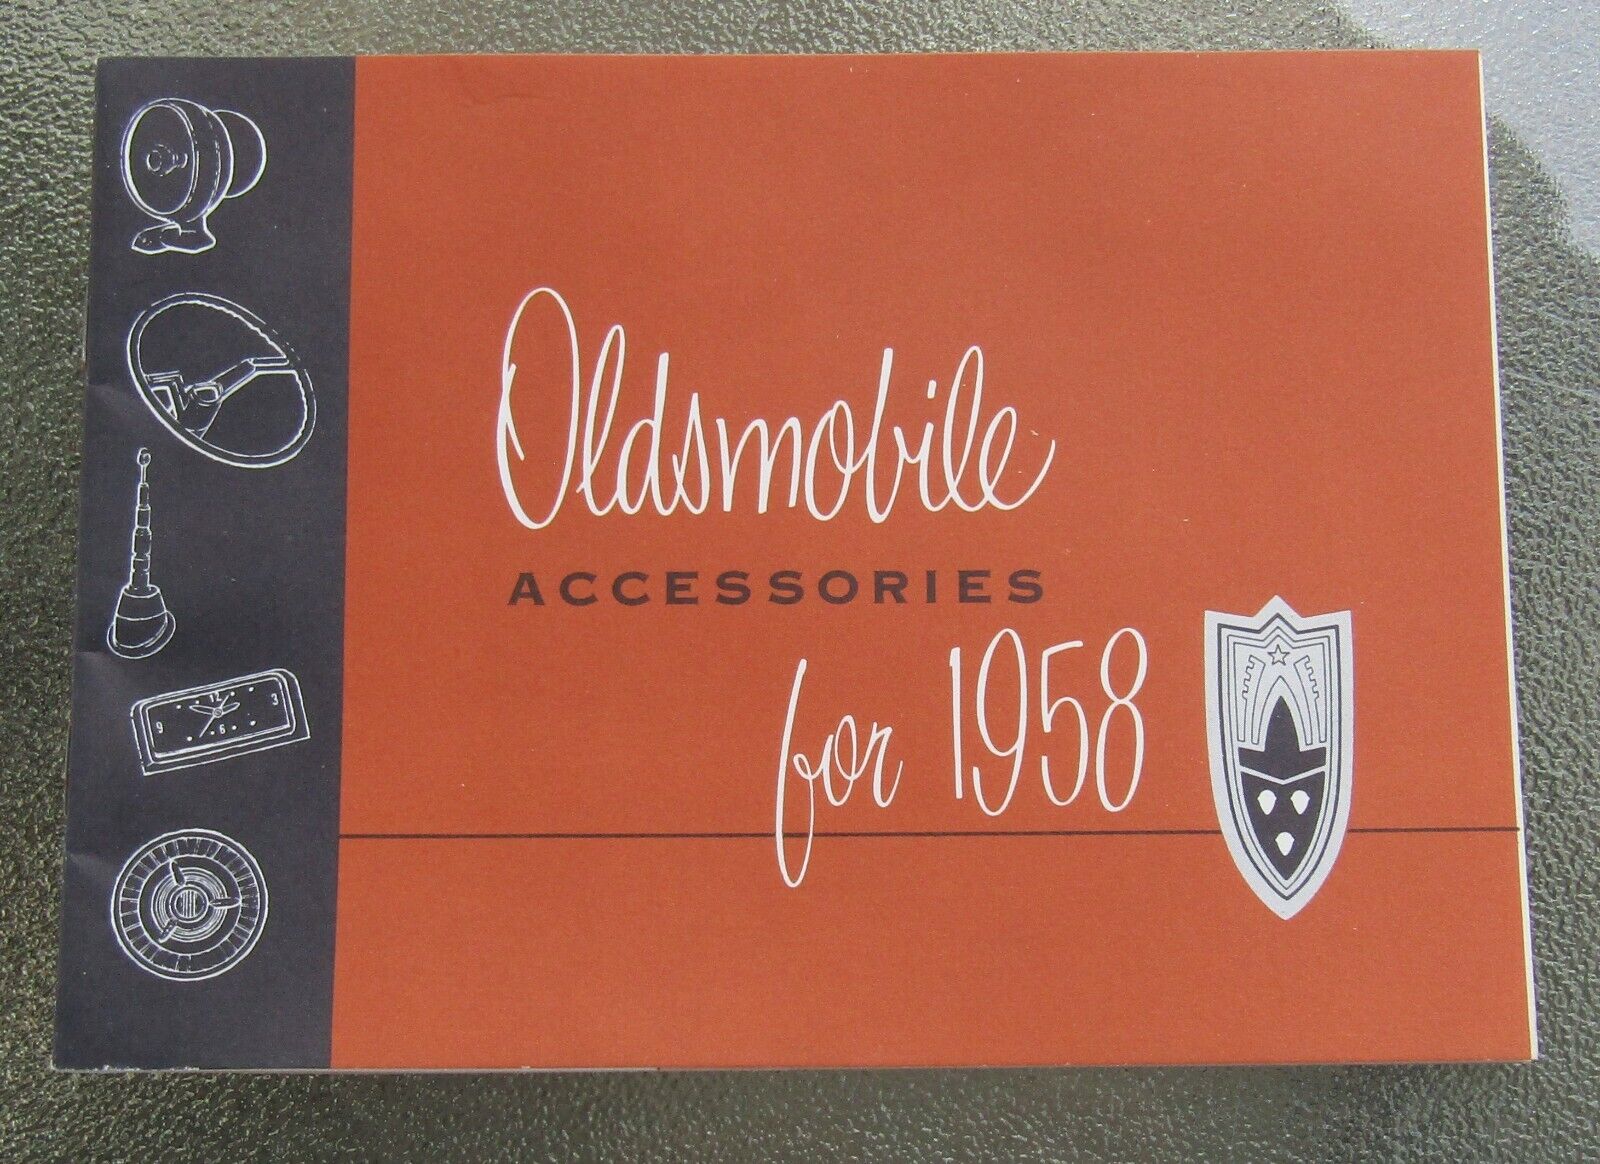 1958 OLDSMOBILE Accessories Illustrated Dealership Brochure 20 Pages CLEAN Look